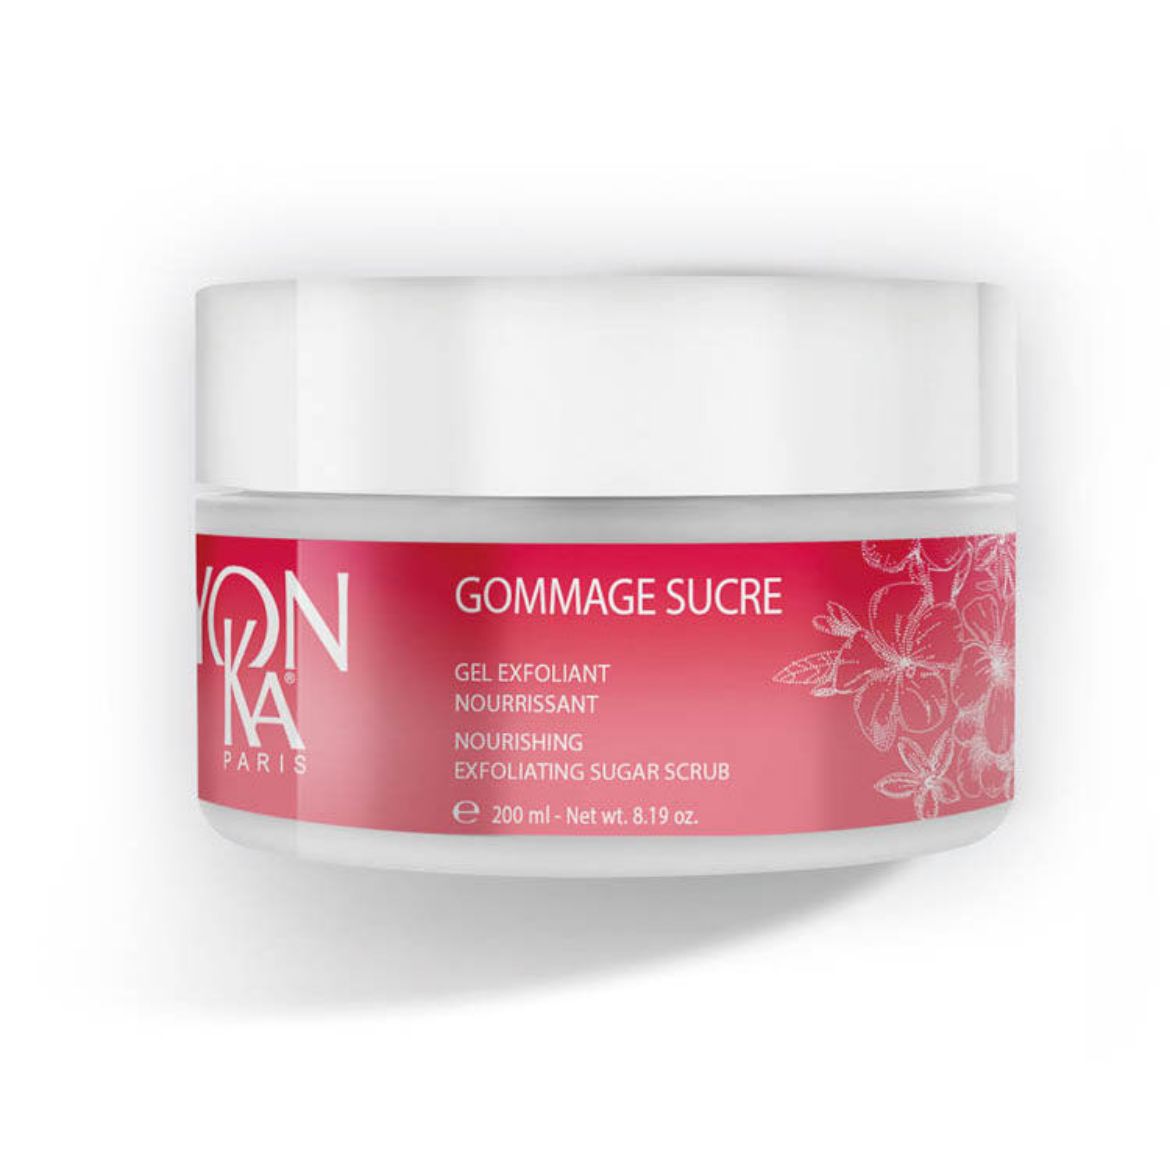 Immagine di Yon-Ka Gommage Sucre Relax (200ml)